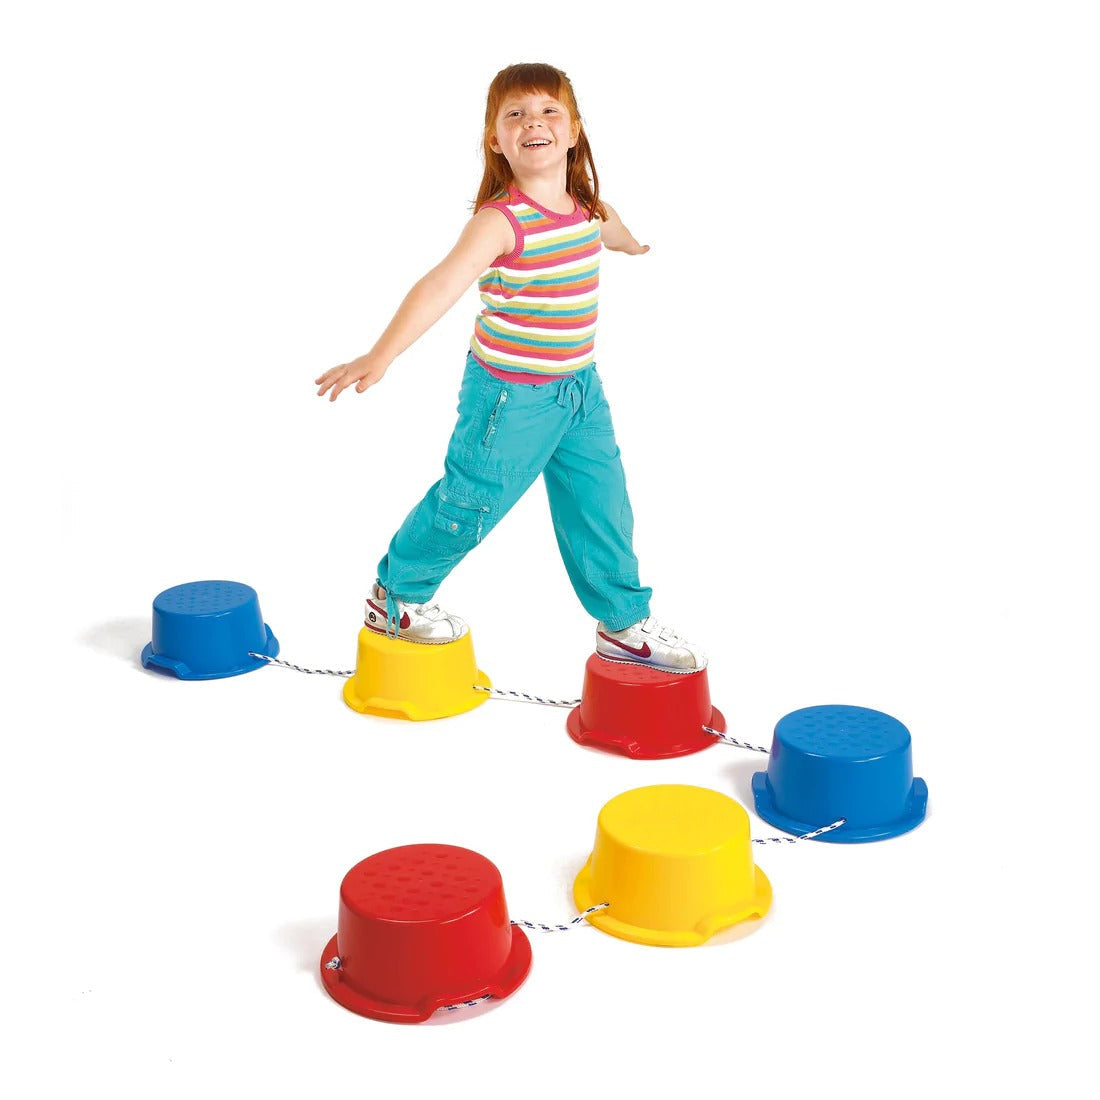 Balance Steps, Set of 6 sturdy flat topped Balance Step a Stones connected with ropes which may be adjusted. Each Balance Step a Stones has a pimpled platform to help prevent slipping. Children will gain confidence and improve balance as they progress from stepping on each Balance Step a Stone over short gaps to jumping over longer gaps. Create an exciting path for a journey of learning through play with our edx education Step-A-Stones! Ideal for improving coordination, balance and gross motor skills. Can b